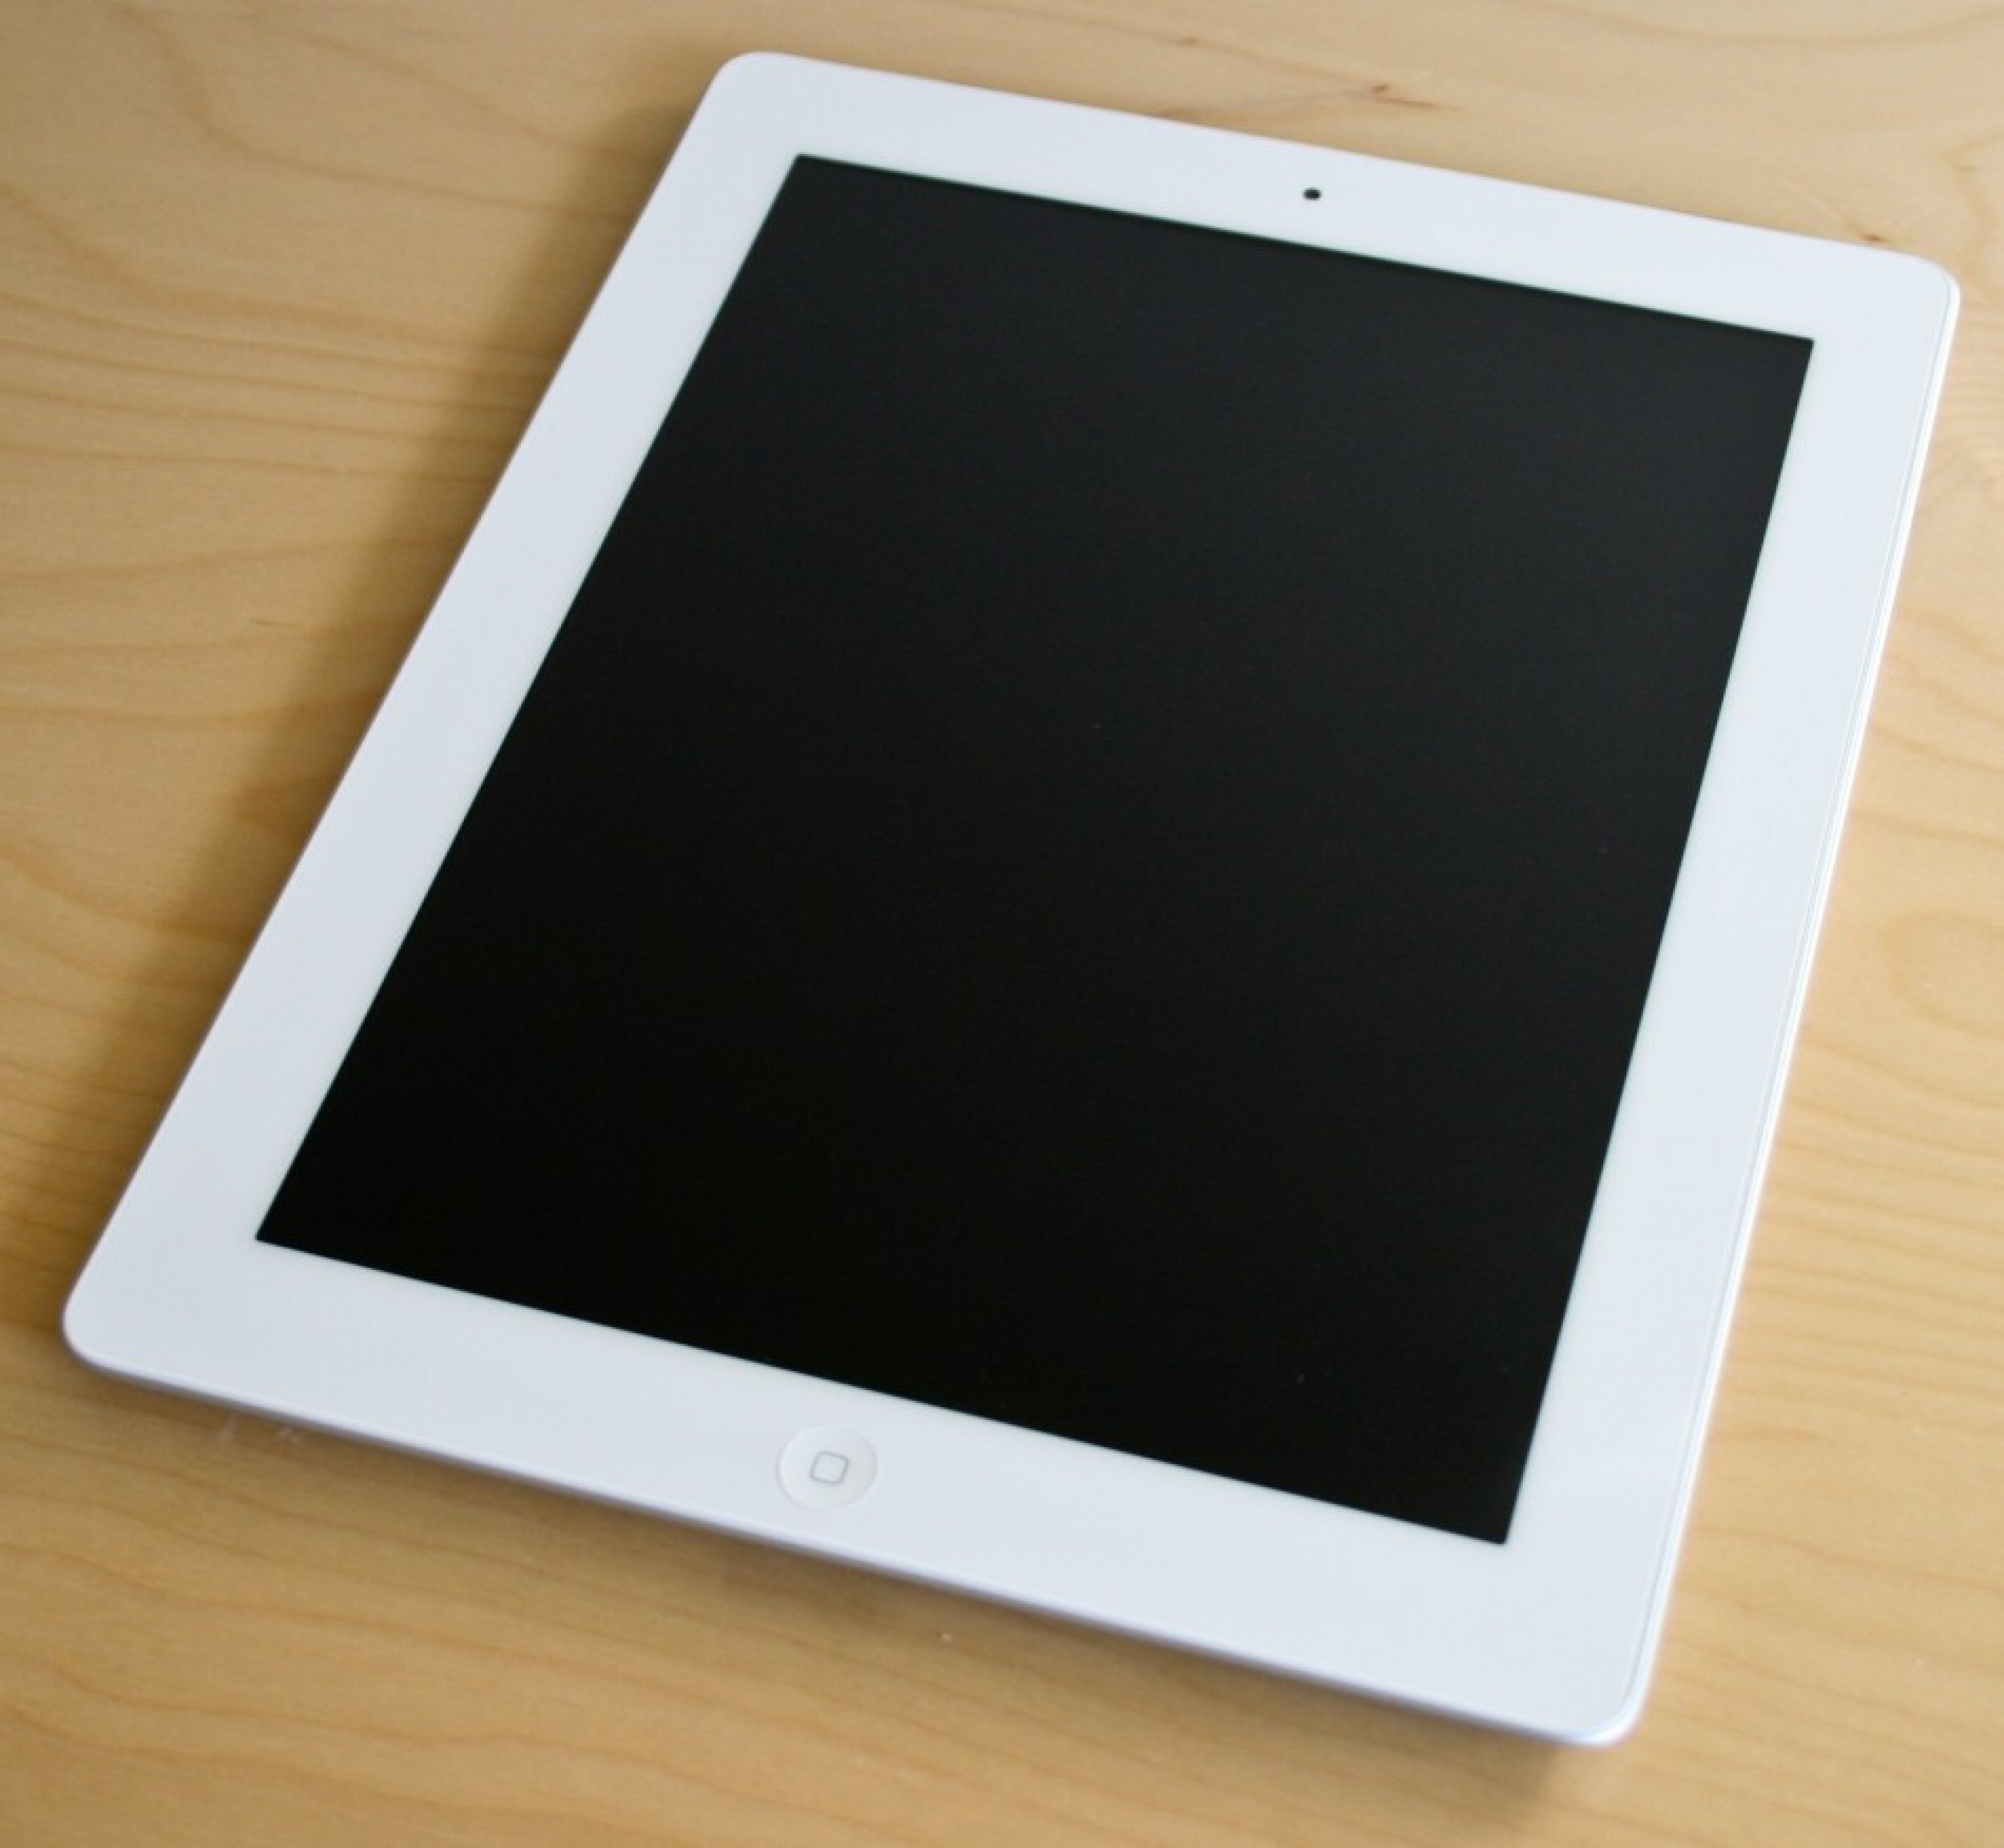 Apple is busy prepping its next iPad, presumably called the iPad 3, for an early March release. But even though this will be Apples third iPad, theres a good chance the hype machine is actually promoting an iPad 2S.